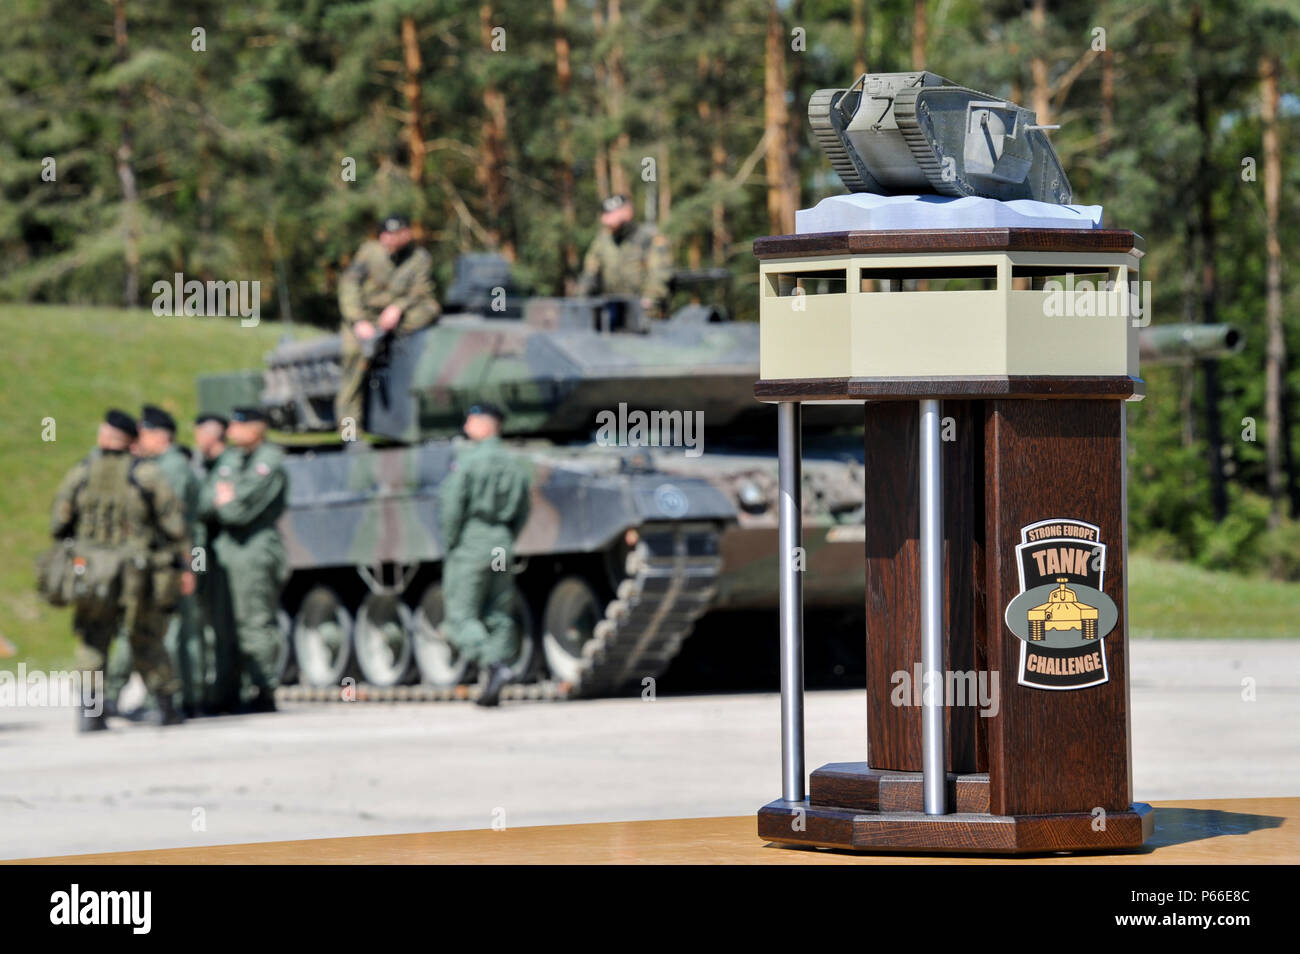 Picture shows the trophy of the Strong Europe Tank Challenge (SETC), May 08, 2016 at Grafenwoehr Training Area, Germany. The SETC is co-hosted by U.S. Army Europe and the German Bundeswehr May 10-13, 2016. The competition is designed to foster military partnership while promoting NATO interoperability. Seven platoons from six NATO nations are competing in SETC - the first multinational tank challenge at Grafenwoehr in 25 years. For more photos, videos and stories from the Strong Europe Tank Challenge, go to http://www.eur.army.mil/tankchallenge/ (U.S. Army photo by Visual Information Specialis Stock Photo